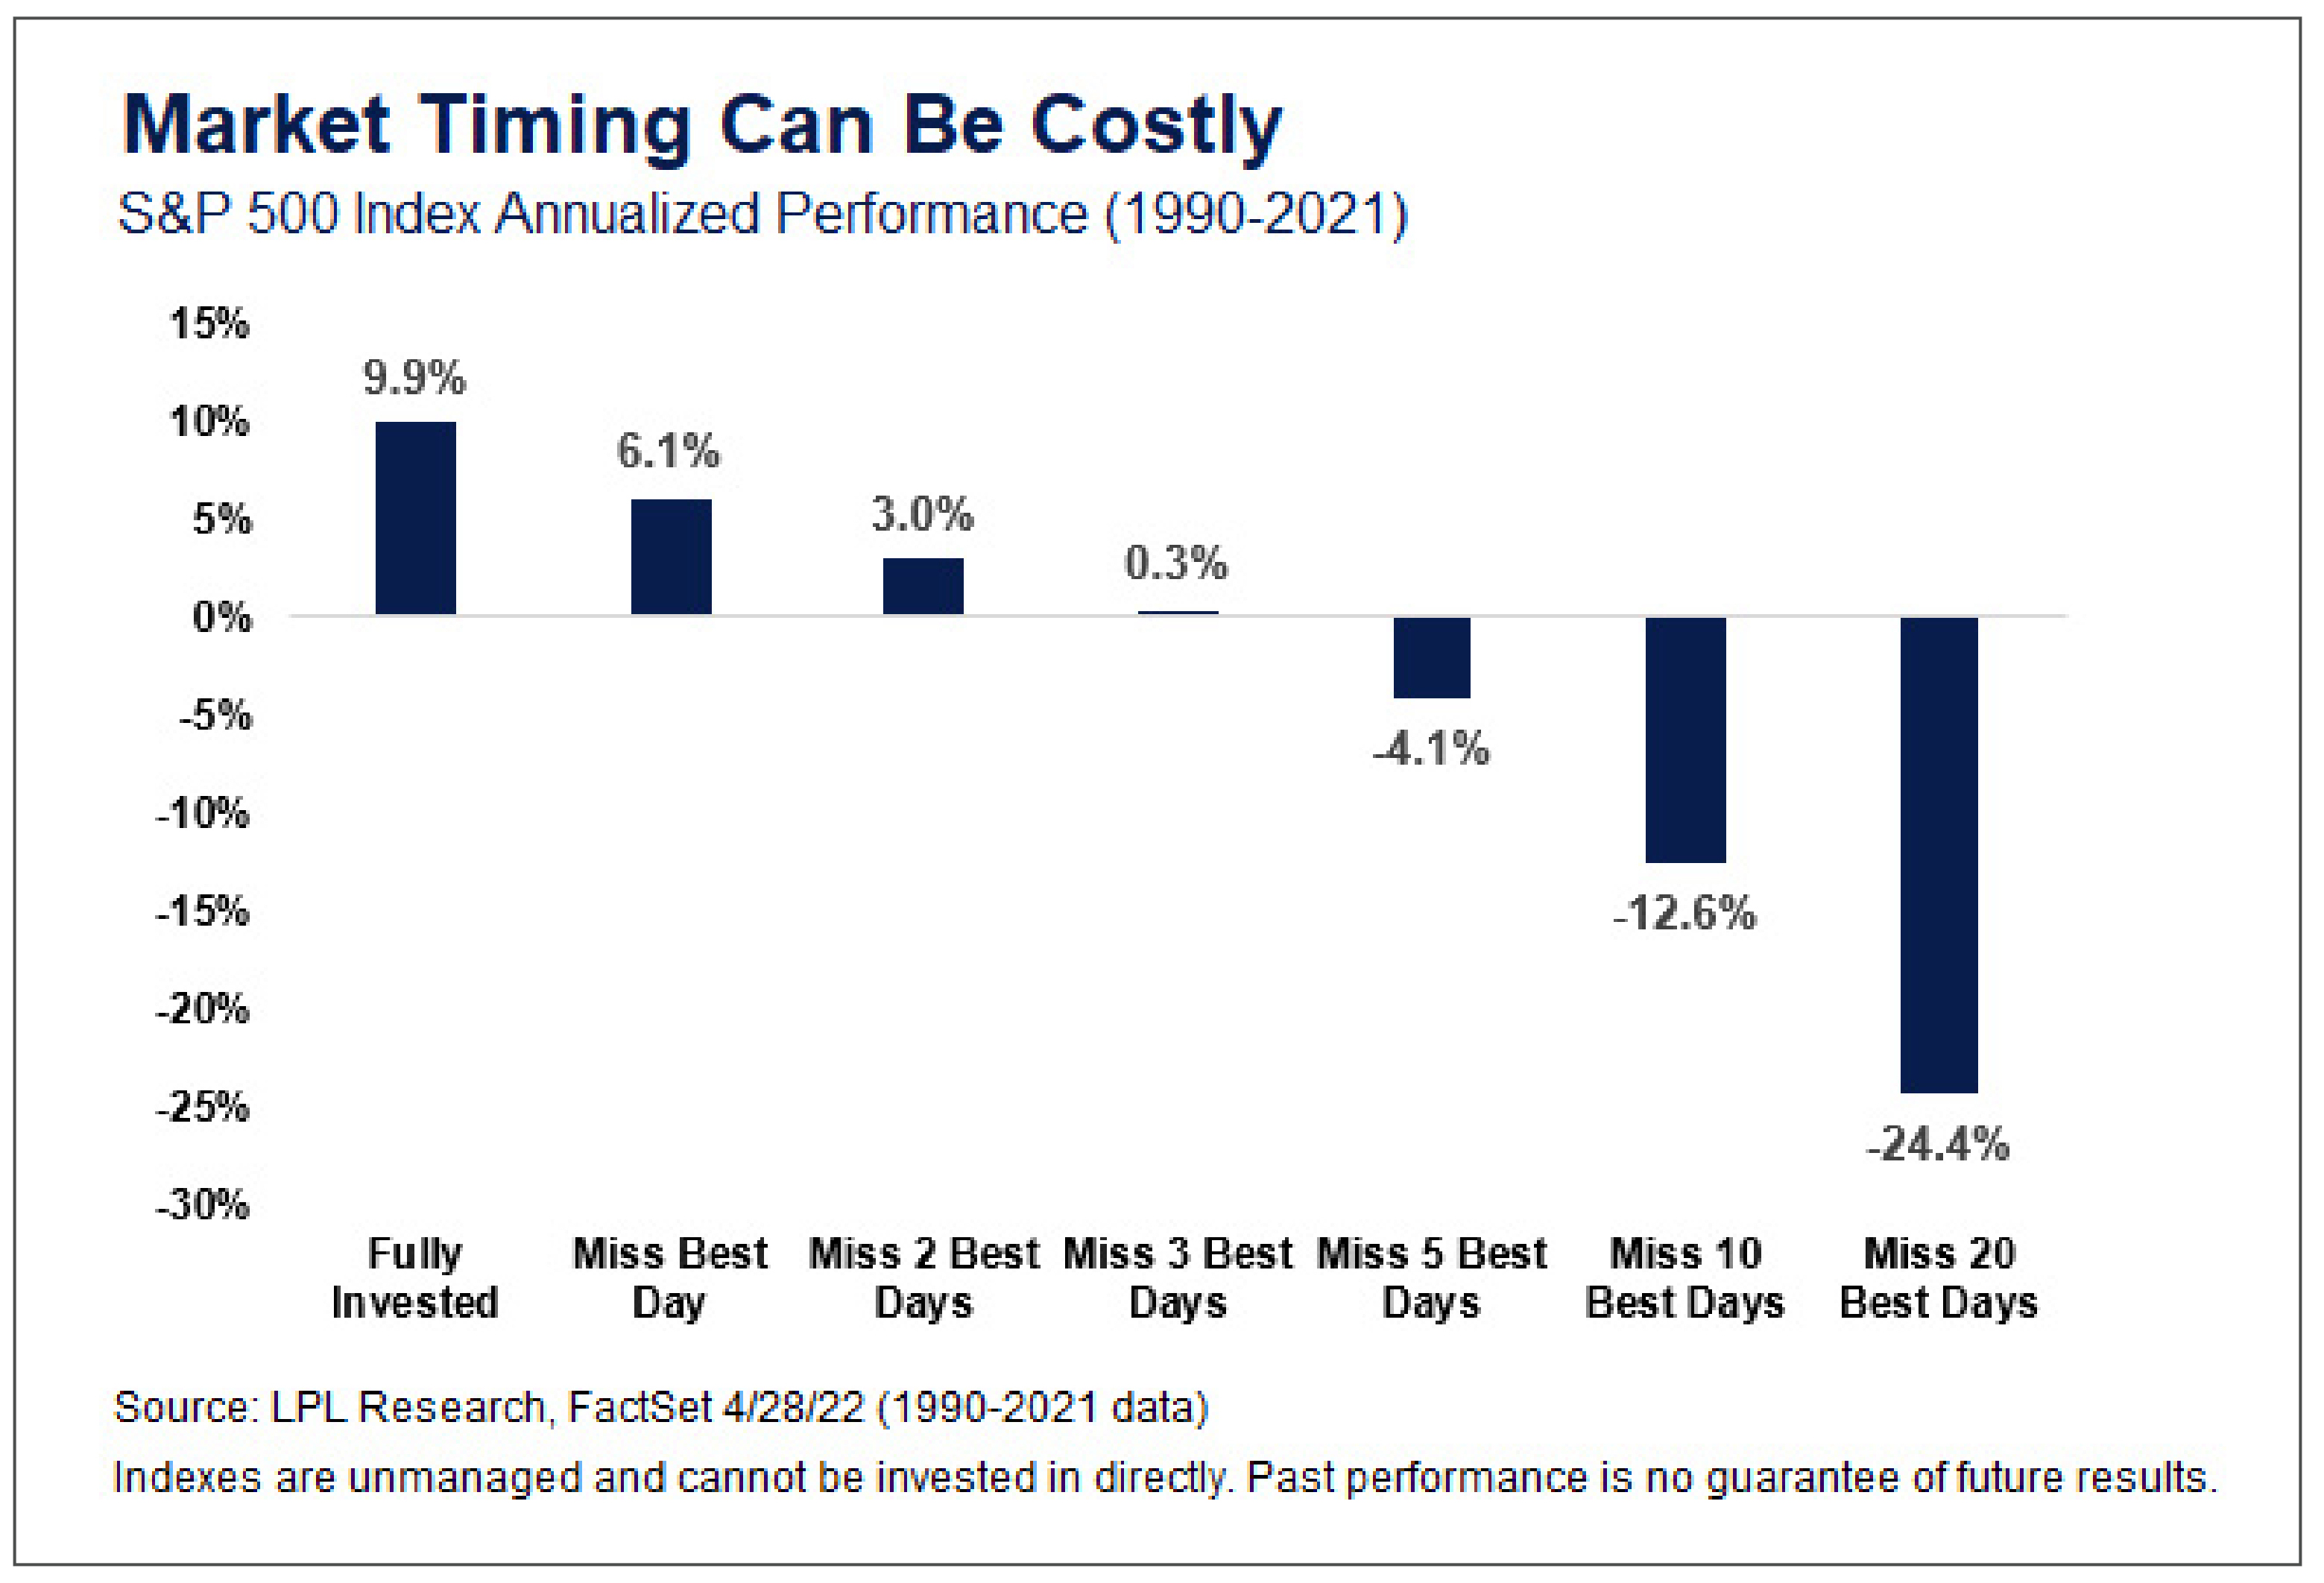 Market Timing Can Be Costly graphic